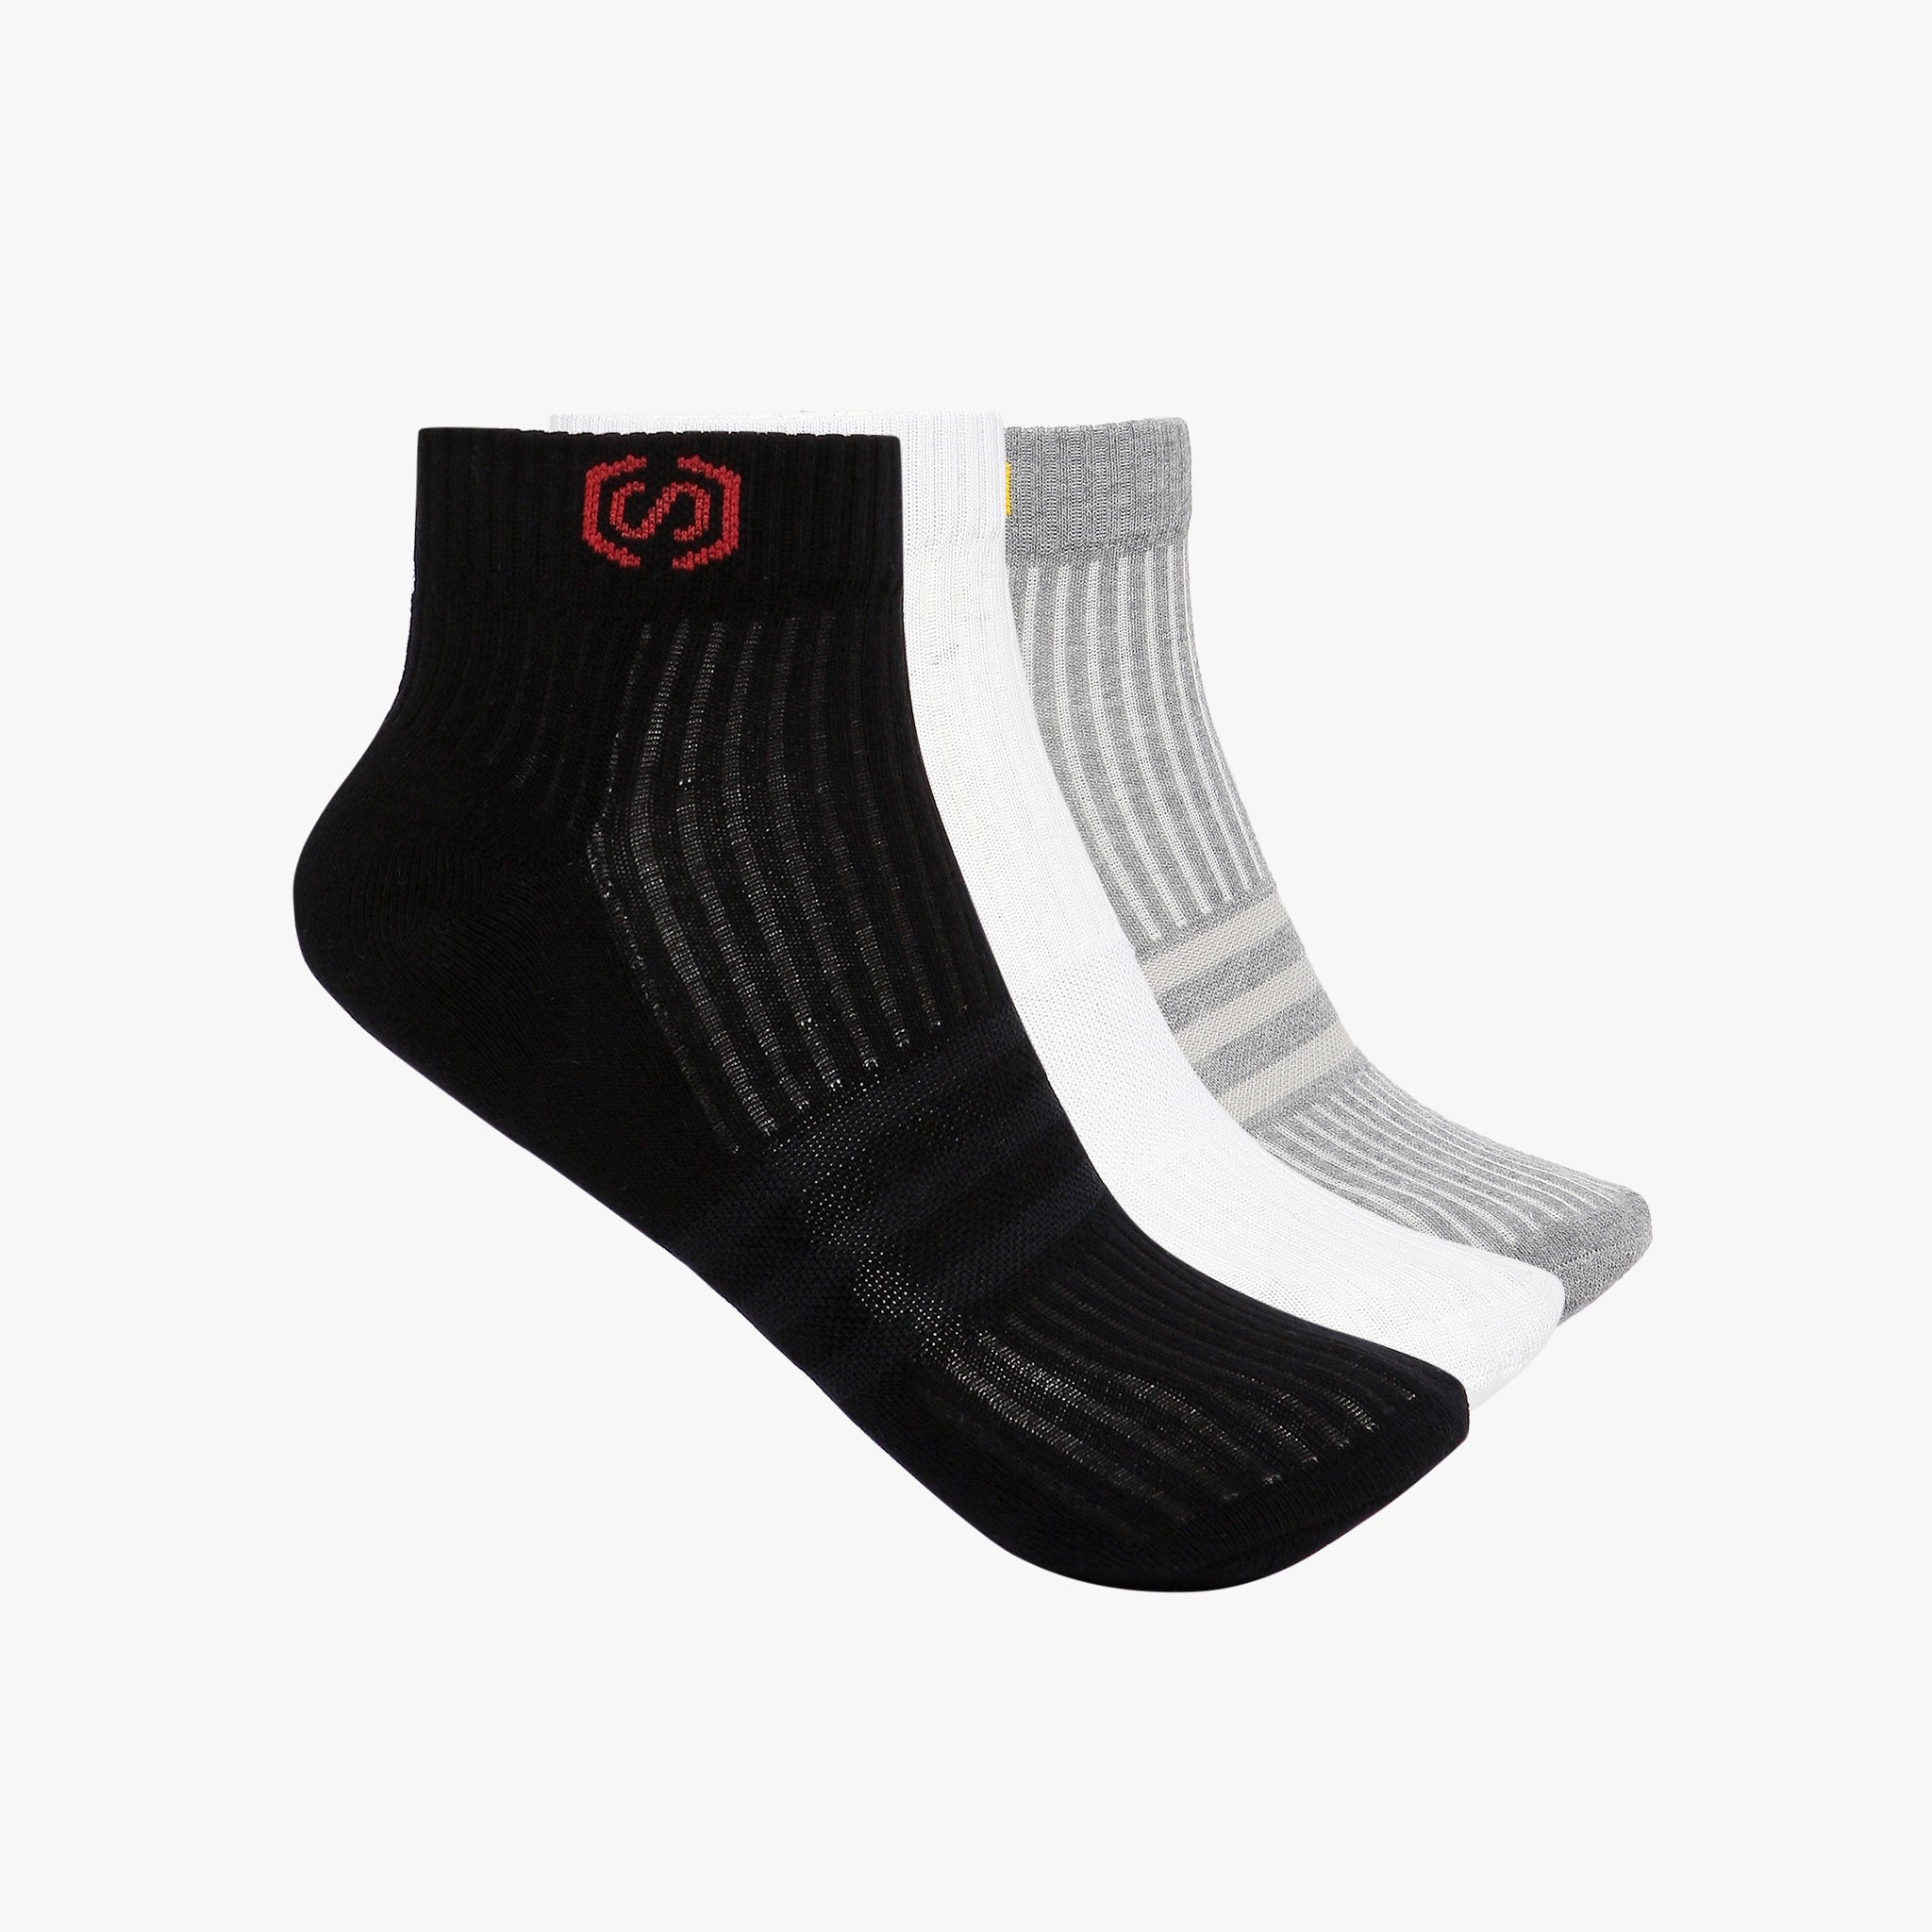 Buy Assorted Free Size Ankle Socks - Style Union